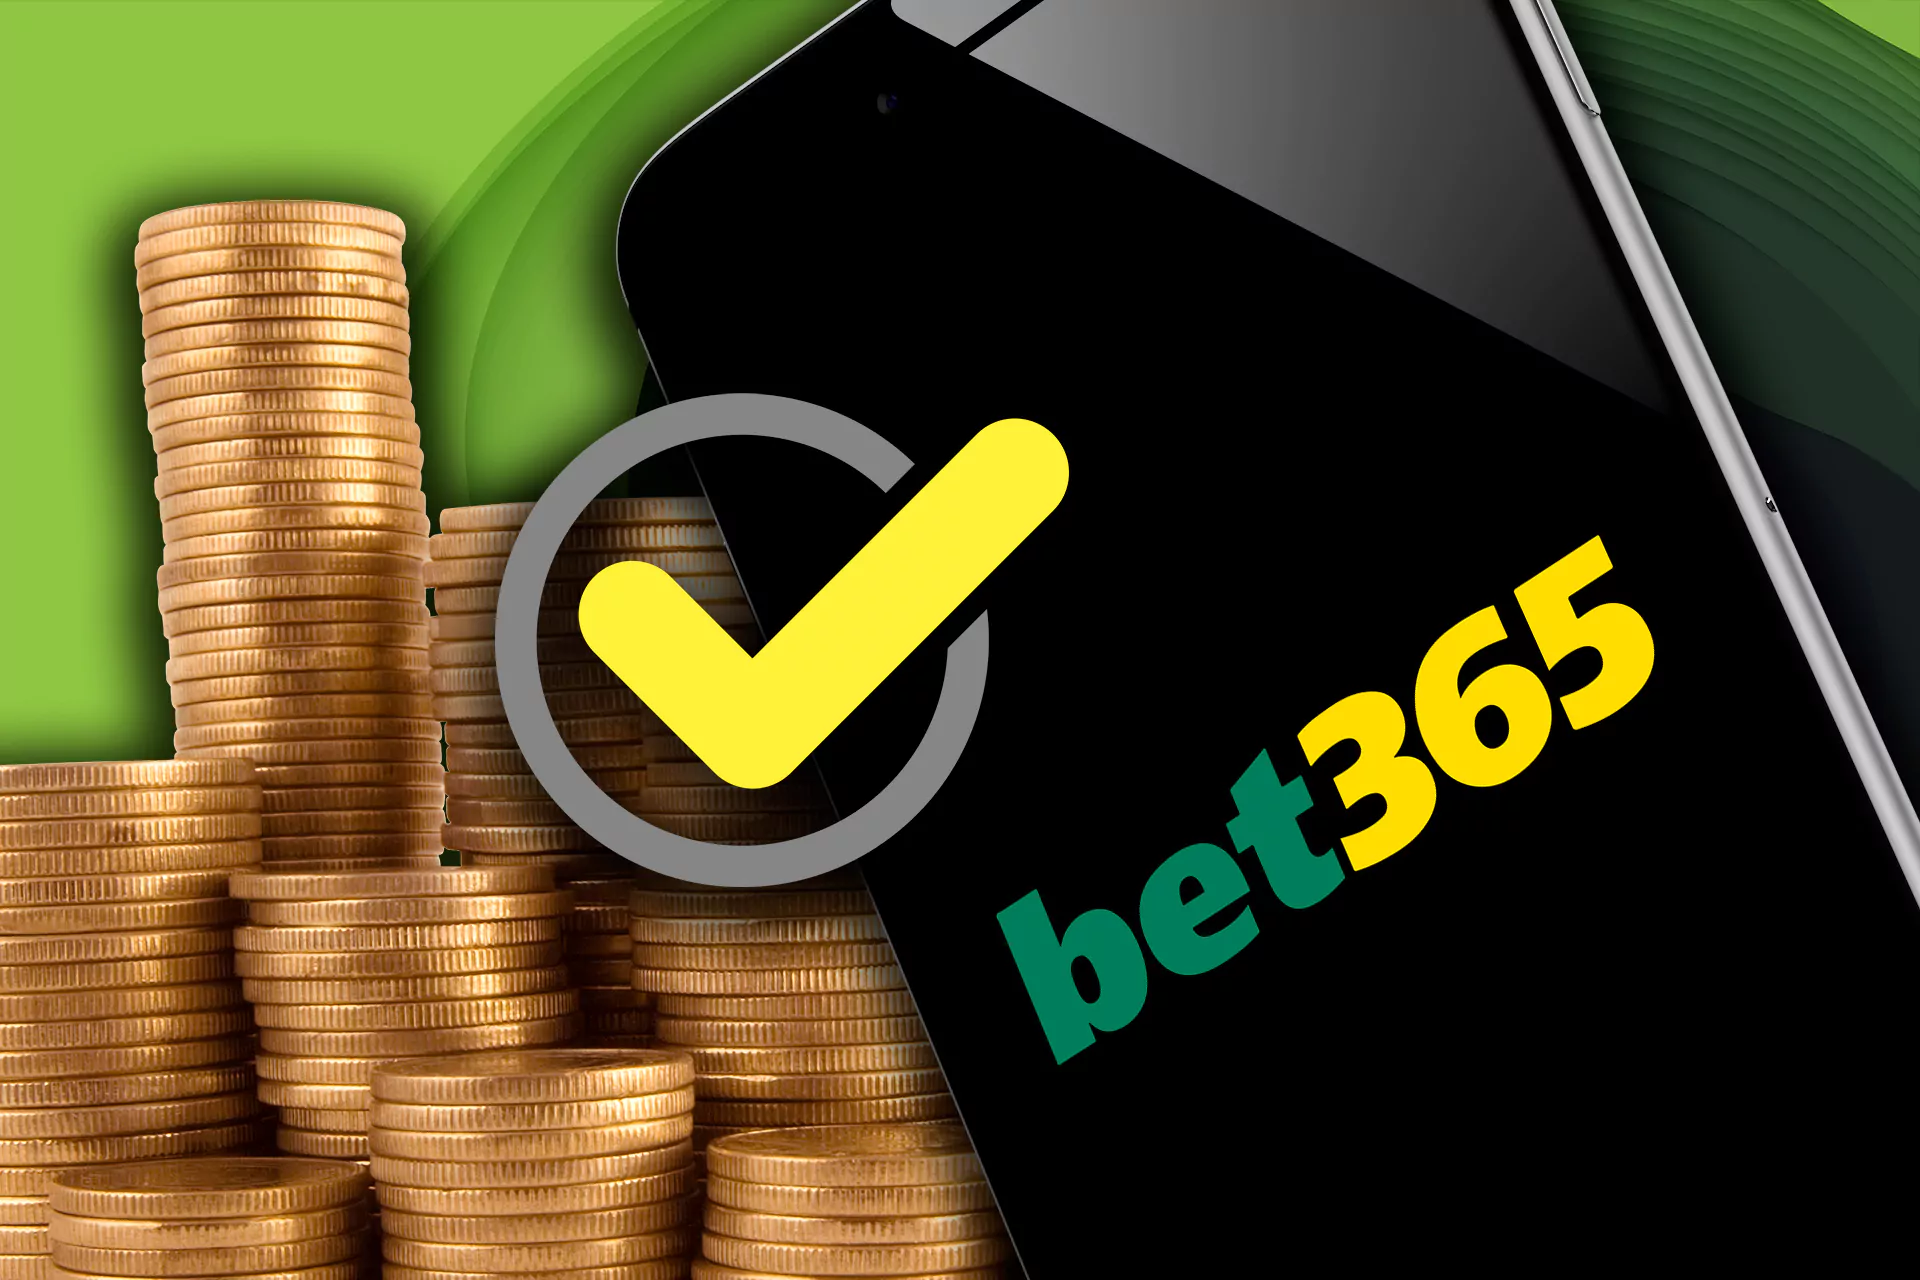 To summarize, Bet365 app is a good choice for cricket betting and for casino games.